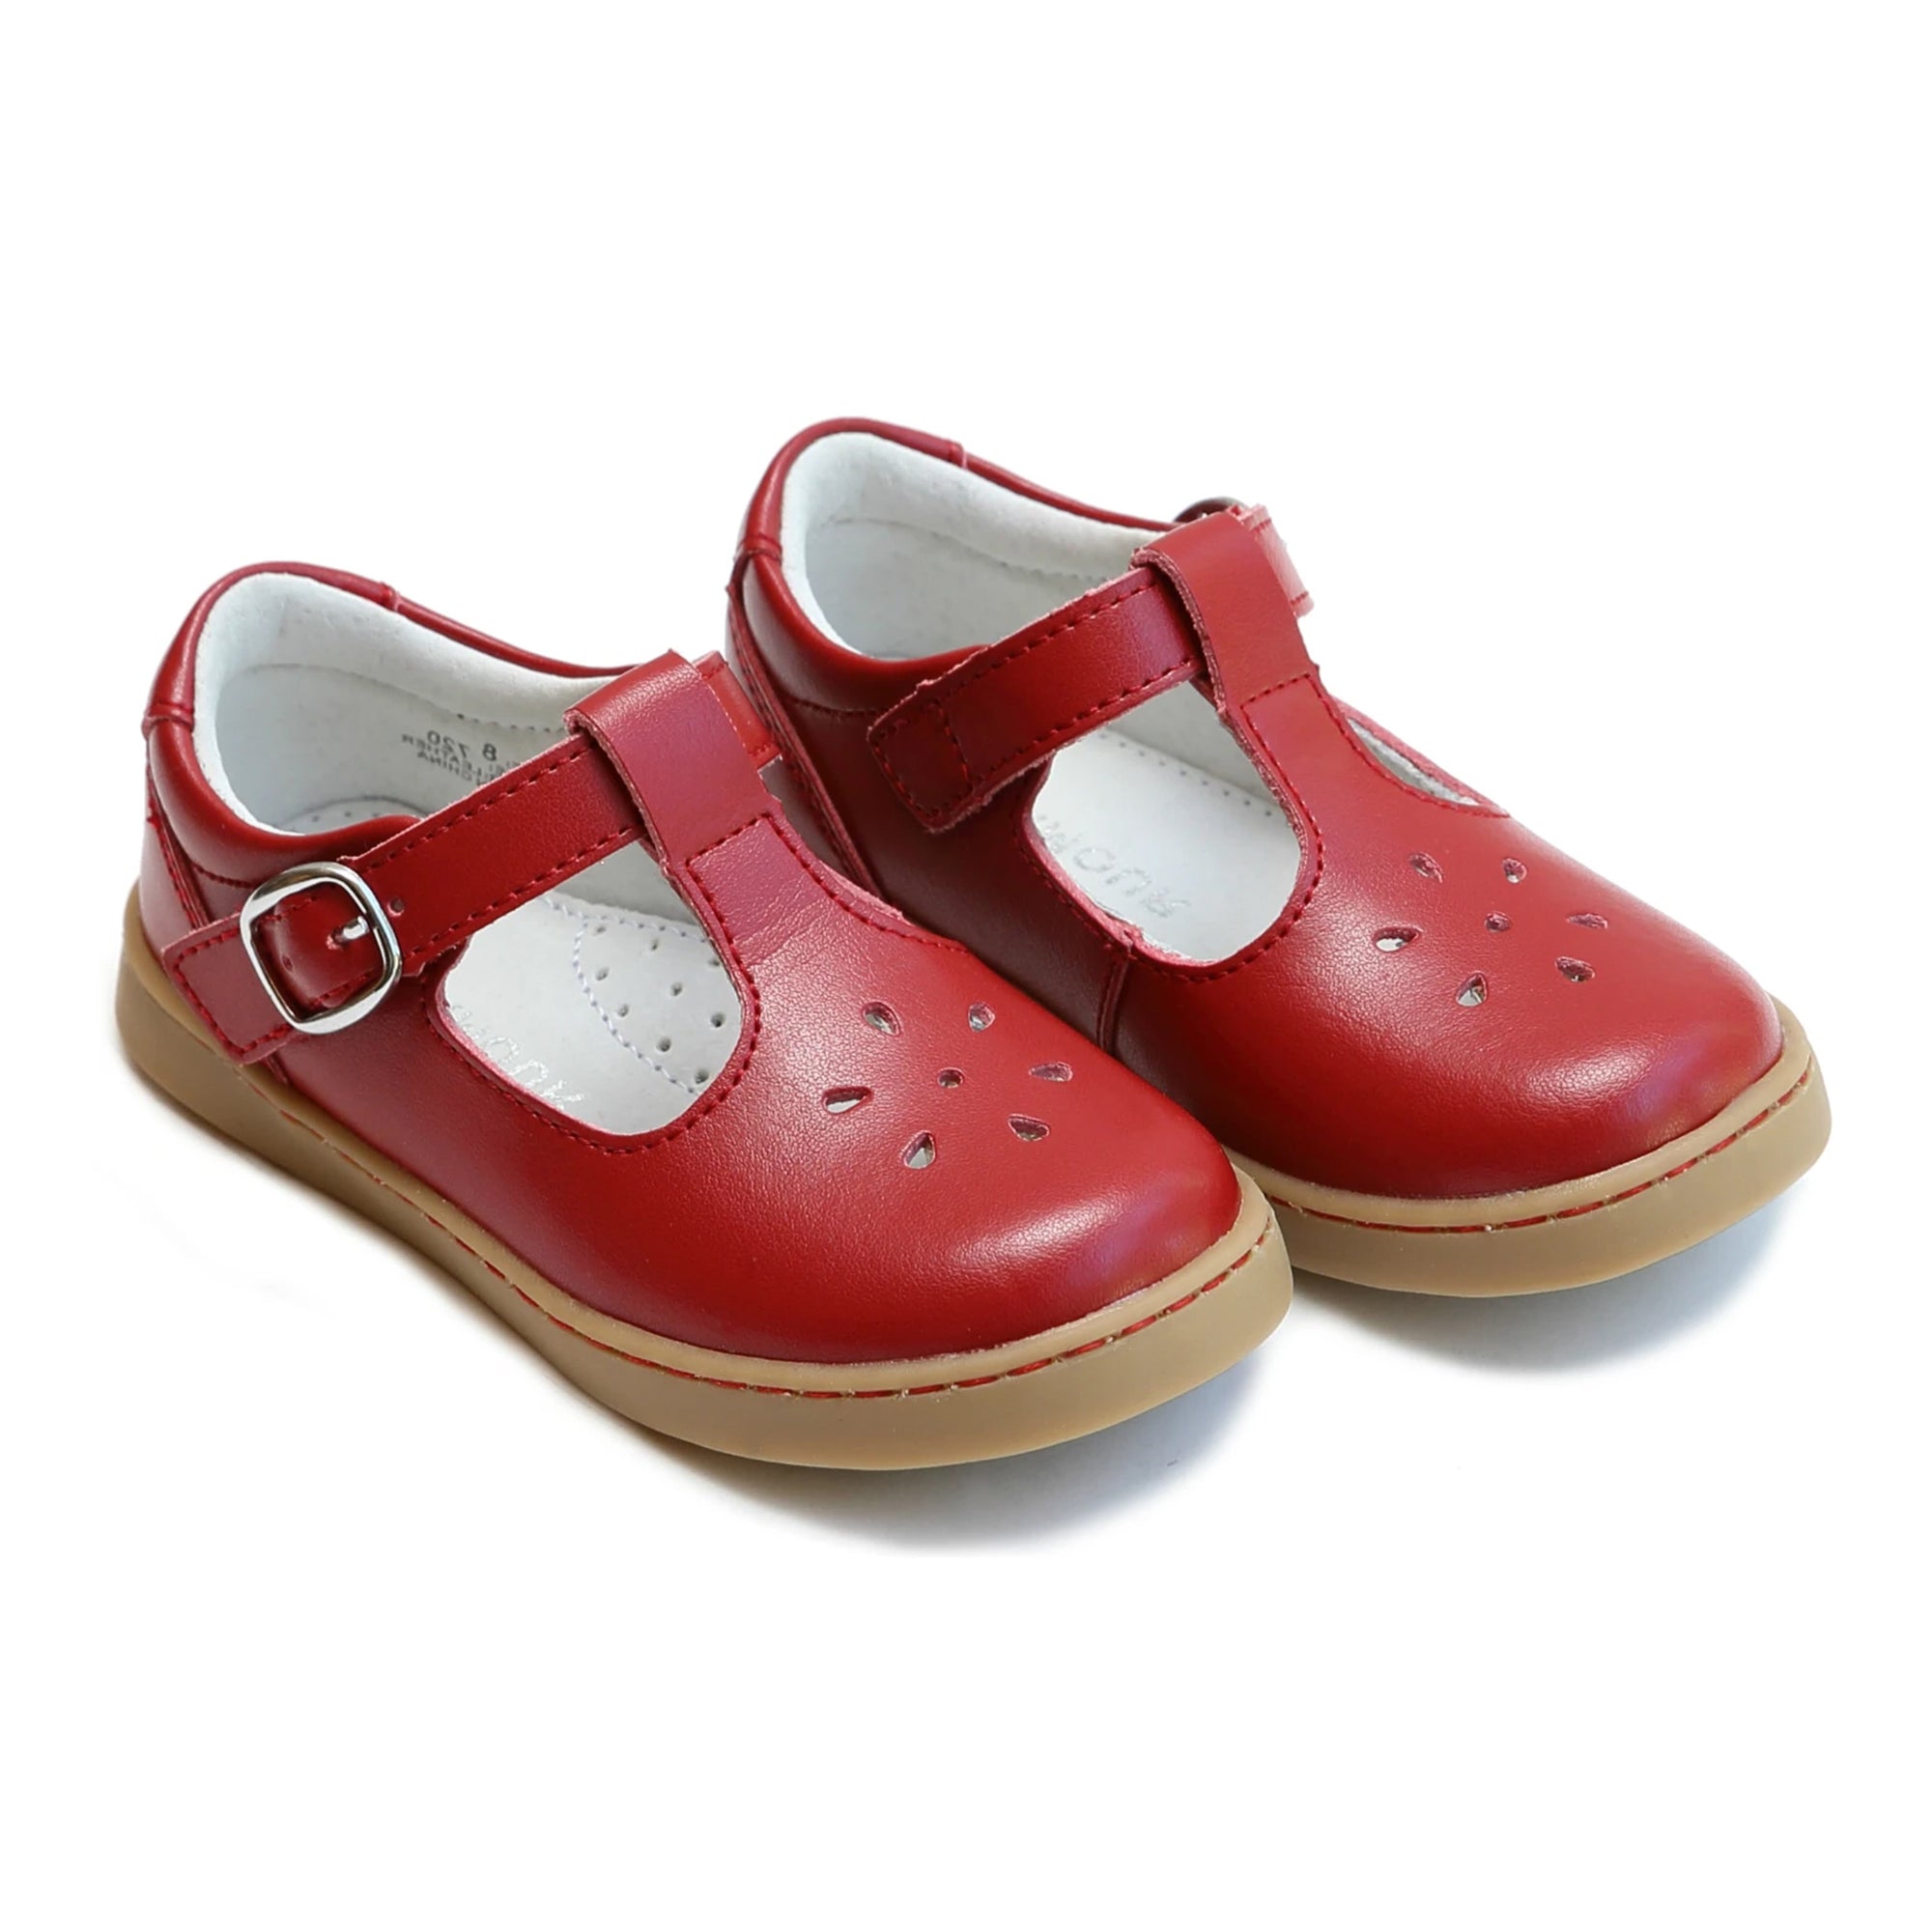 L'Amour Chelsea Little Girl's Red T-Strap Mary Jane Shoes